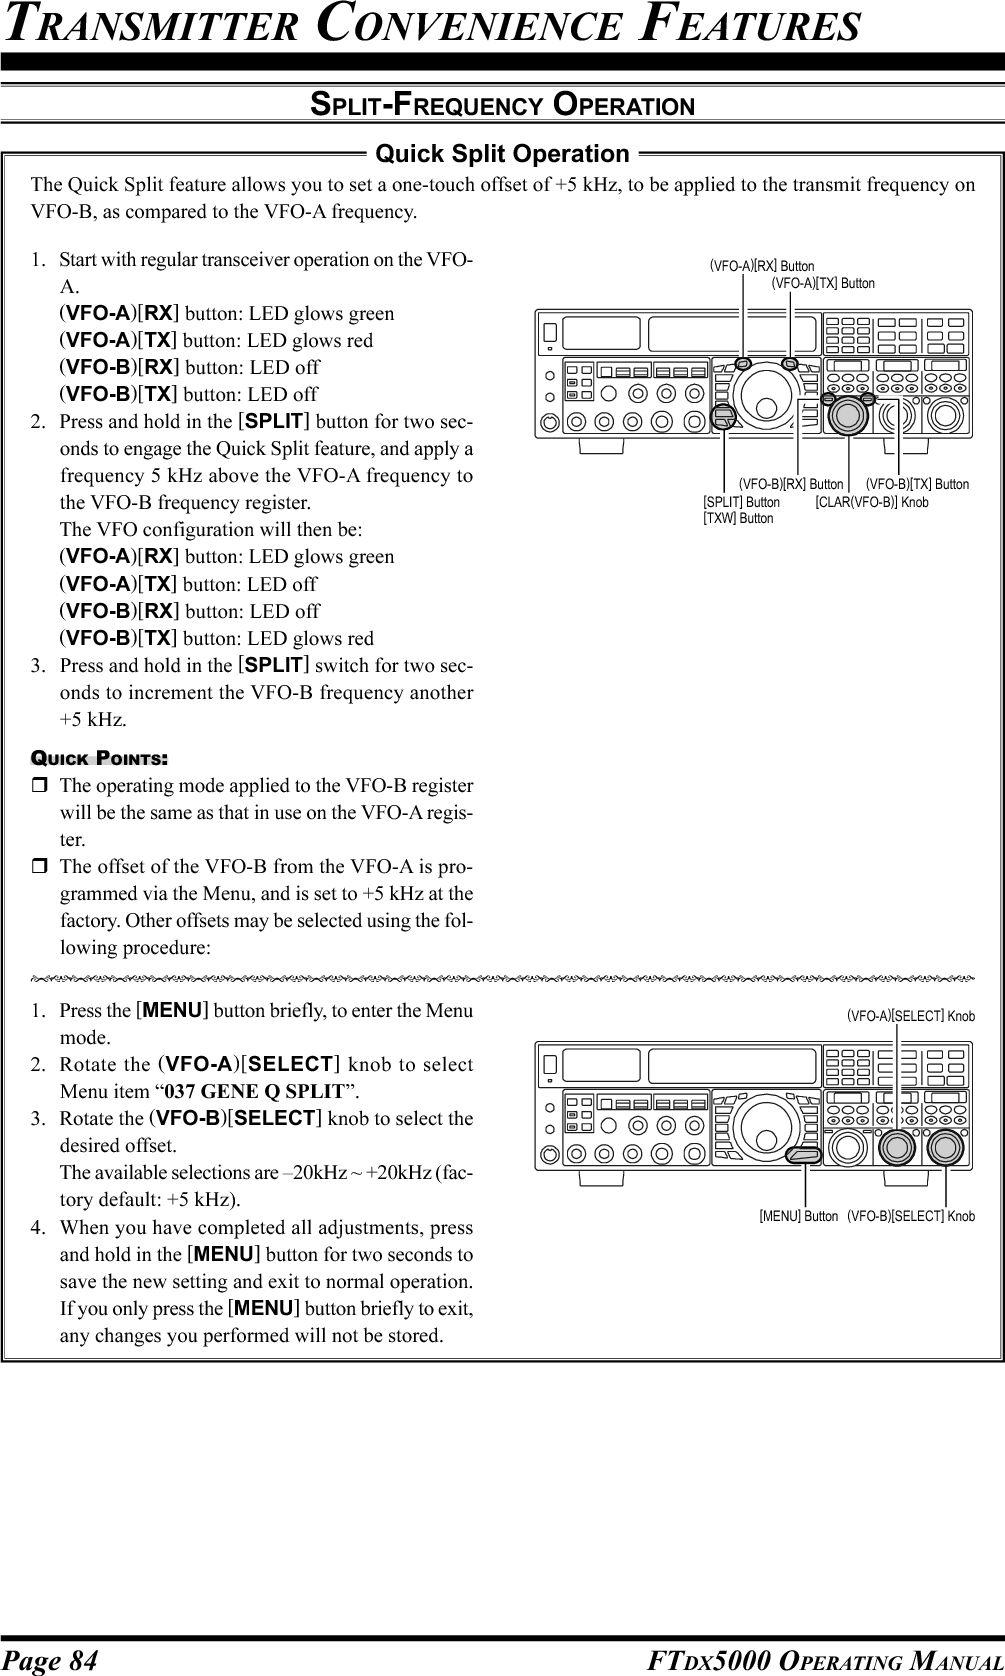 Page 84 FTDX5000 OPERATING MANUALTRANSMITTER CONVENIENCE FEATURESSPLIT-FREQUENCY OPERATION1. Start with regular transceiver operation on the VFO-A.(VFO-A)[RX] button: LED glows green(VFO-A)[TX] button: LED glows red(VFO-B)[RX] button: LED off(VFO-B)[TX] button: LED off2. Press and hold in the [SPLIT] button for two sec-onds to engage the Quick Split feature, and apply afrequency 5 kHz above the VFO-A frequency tothe VFO-B frequency register.The VFO configuration will then be:(VFO-A)[RX] button: LED glows green(VFO-A)[TX] button: LED off(VFO-B)[RX] button: LED off(VFO-B)[TX] button: LED glows red3. Press and hold in the [SPLIT] switch for two sec-onds to increment the VFO-B frequency another+5 kHz.QUICK POINTS:The operating mode applied to the VFO-B registerwill be the same as that in use on the VFO-A regis-ter.The offset of the VFO-B from the VFO-A is pro-grammed via the Menu, and is set to +5 kHz at thefactory. Other offsets may be selected using the fol-lowing procedure:1. Press the [MENU] button briefly, to enter the Menumode.2. Rotate the (VFO-A)[SELECT] knob to selectMenu item “037 GENE Q SPLIT”.3. Rotate the (VFO-B)[SELECT] knob to select thedesired offset.The available selections are –20kHz ~ +20kHz (fac-tory default: +5 kHz).4. When you have completed all adjustments, pressand hold in the [MENU] button for two seconds tosave the new setting and exit to normal operation.If you only press the [MENU] button briefly to exit,any changes you performed will not be stored.Quick Split OperationThe Quick Split feature allows you to set a one-touch offset of +5 kHz, to be applied to the transmit frequency onVFO-B, as compared to the VFO-A frequency.[CLAR(VFO-B)] Knob(VFO-B)[TX] Button(VFO-B)[RX] Button[SPLIT] Button[TXW] Button(VFO-A)[TX] Button(VFO-A)[RX] Button(VFO-B)[SELECT] Knob[MENU] Button(VFO-A)[SELECT] Knob